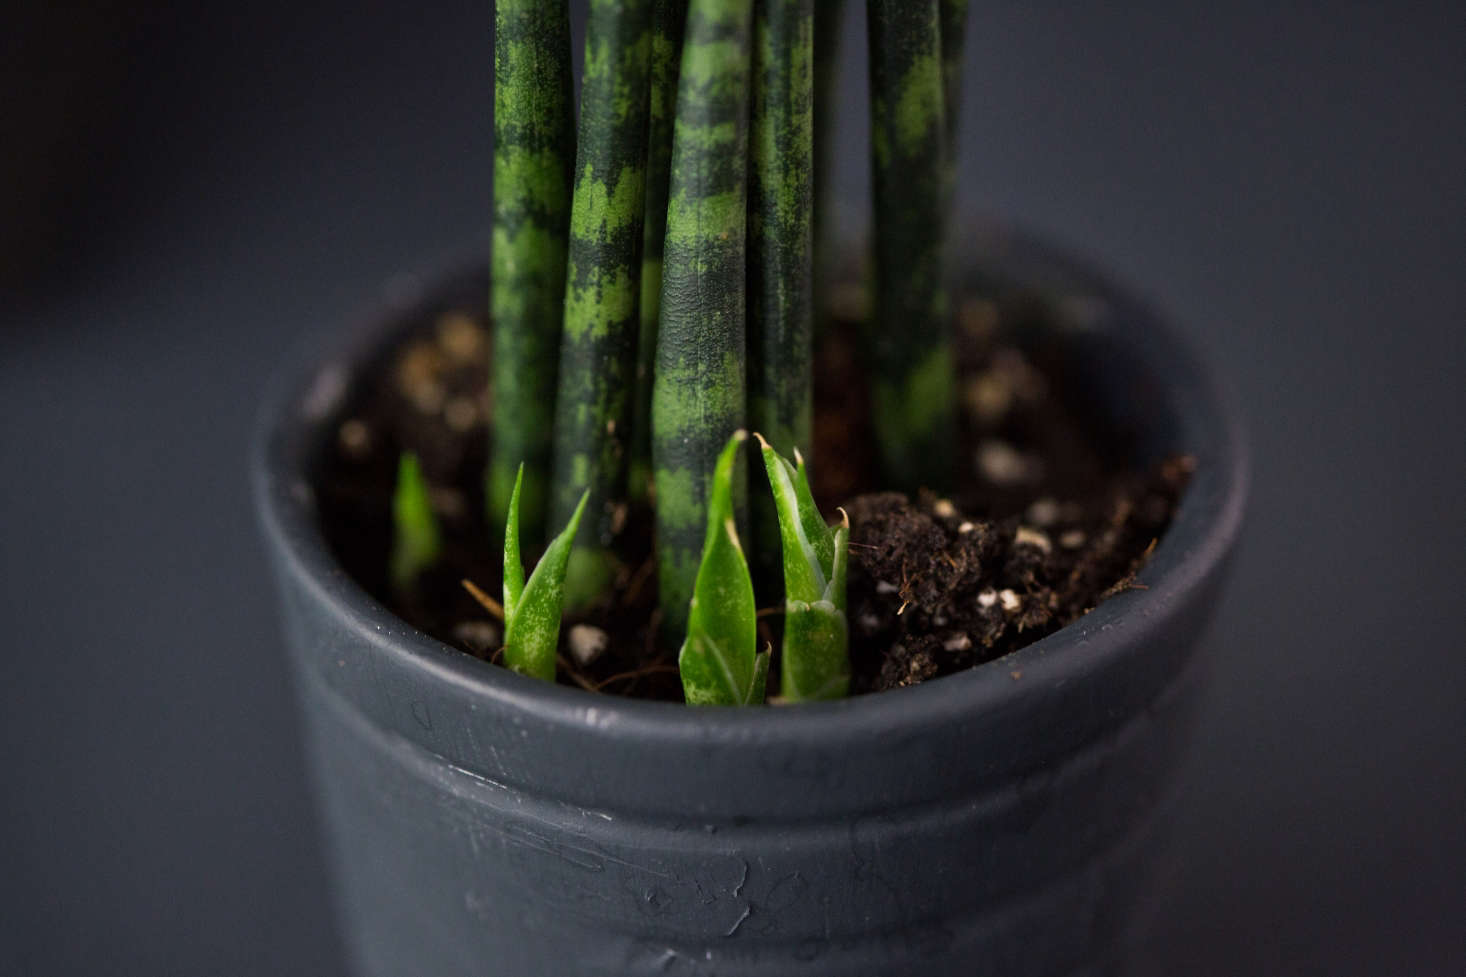 A snake plant (Sansevieria) sprouts offshoots. Photograph by Mimi Giboin. For more, see Dressed to Kill: 7 Haunted Houseplants for Halloween.